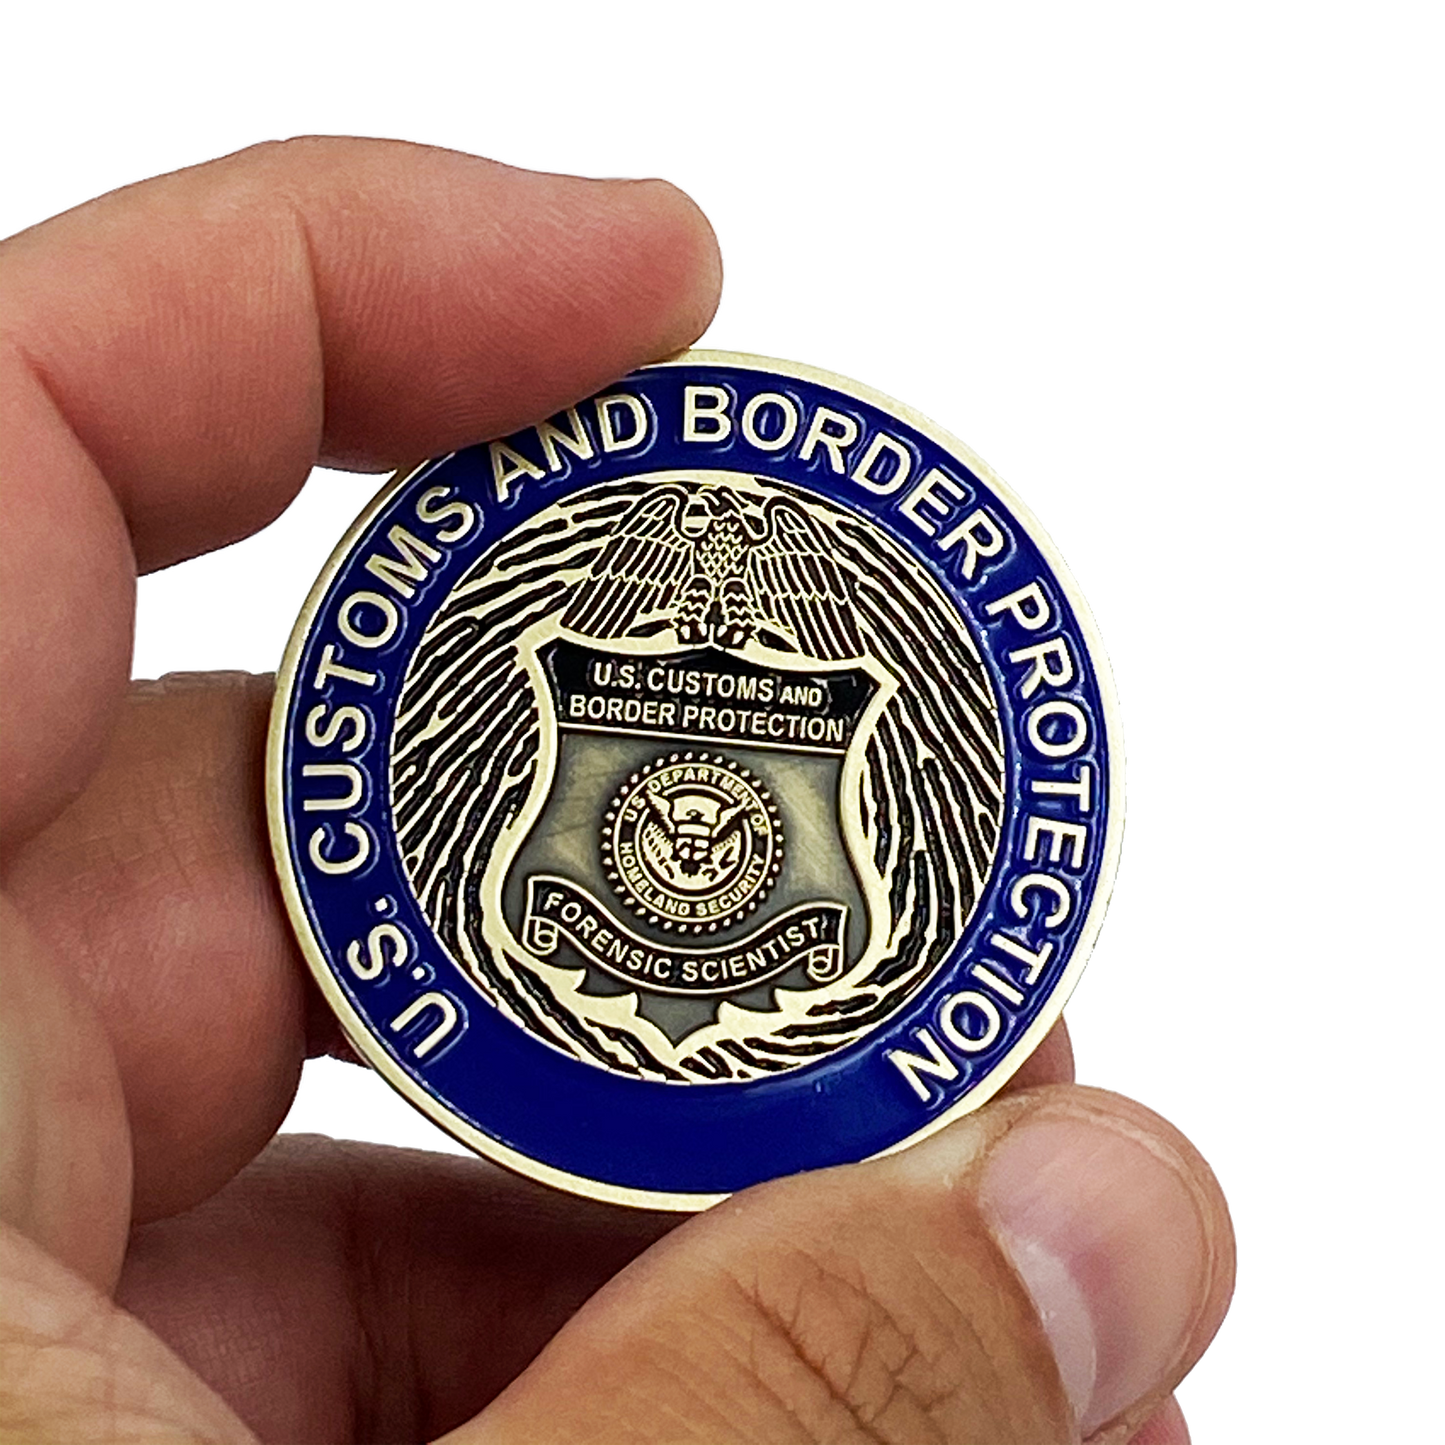 DL7-06 CBP Forensics Scientist Laboratories and Scientific Services Border Patrol Field Operations AMO Challenge Coin